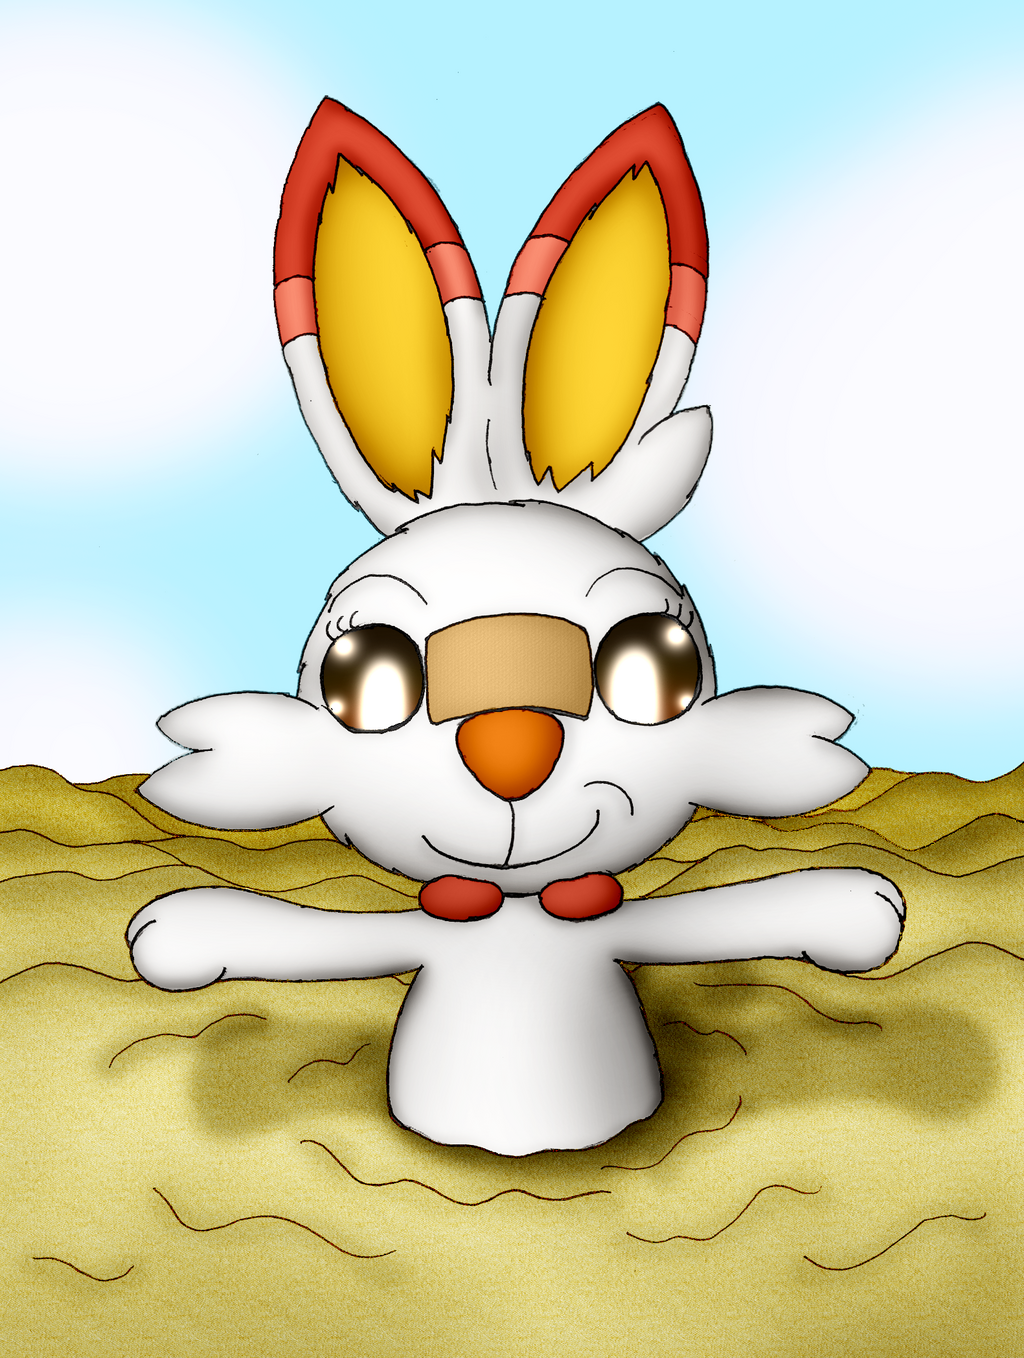 A Happily Quicksand-Sinking Scorbunny (Commission)